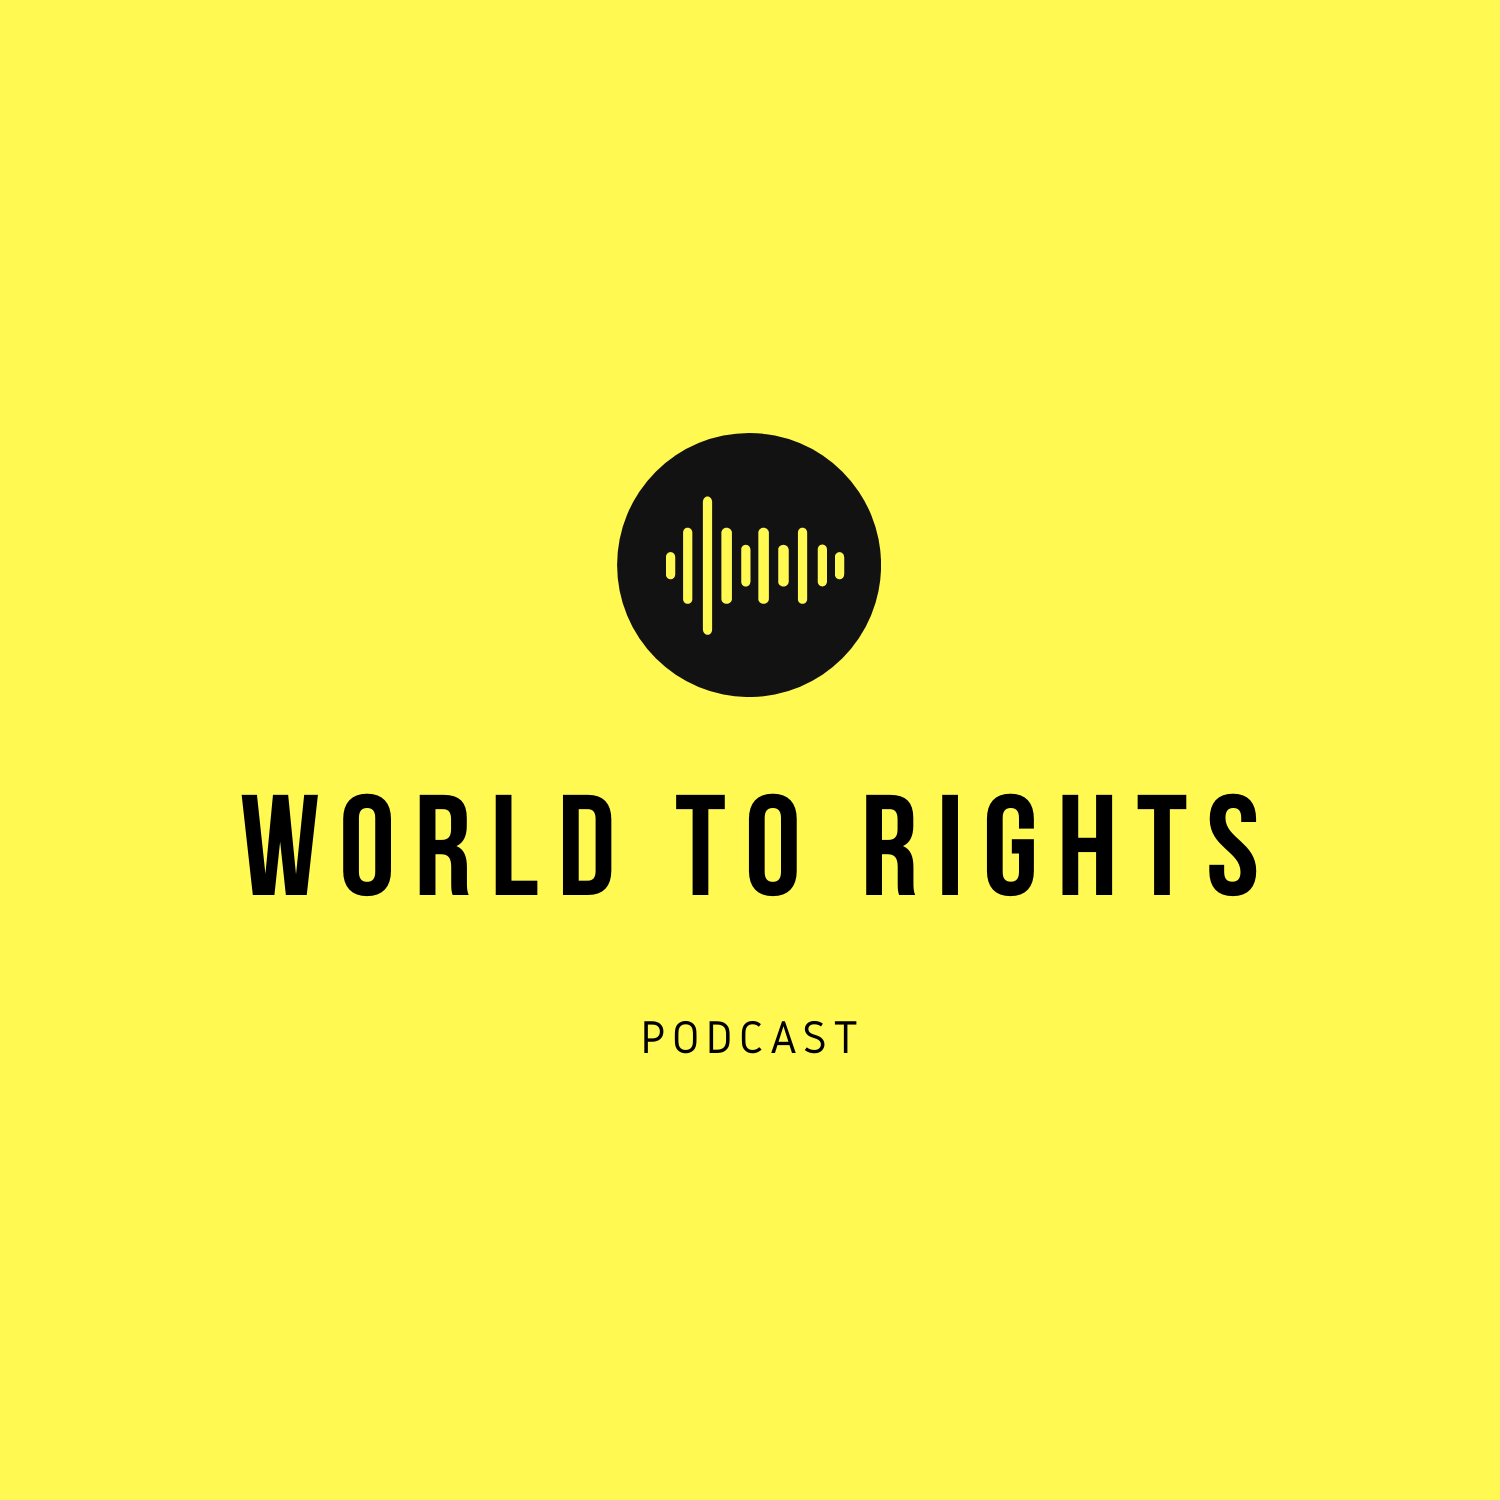 World to Rights Podcast